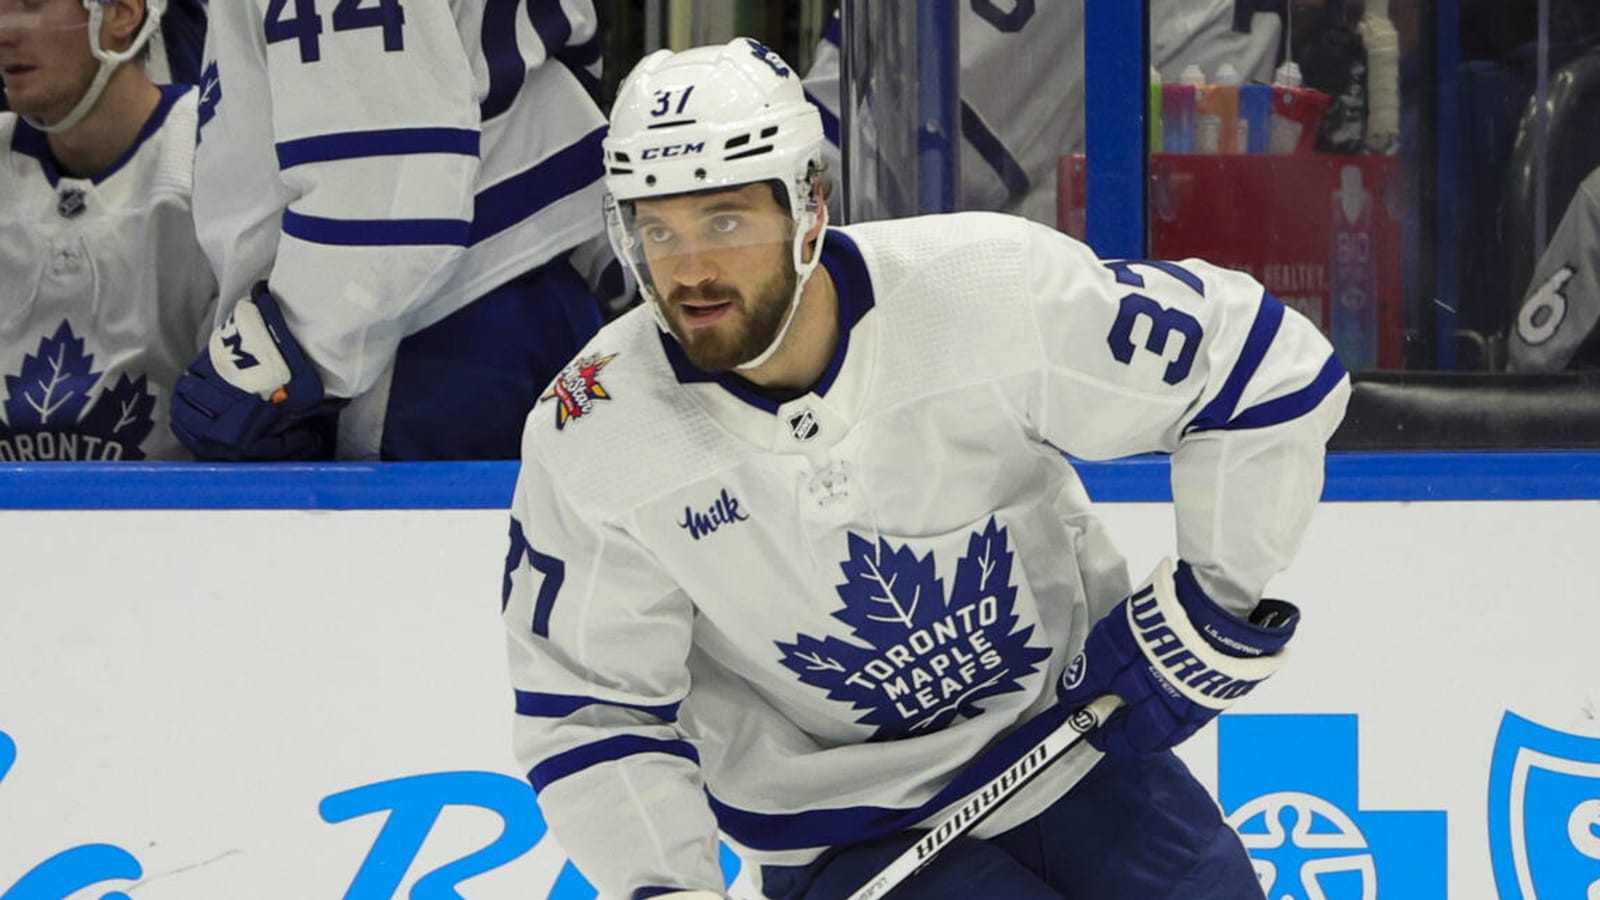 Maple Leafs defenseman leaves game with apparent injury